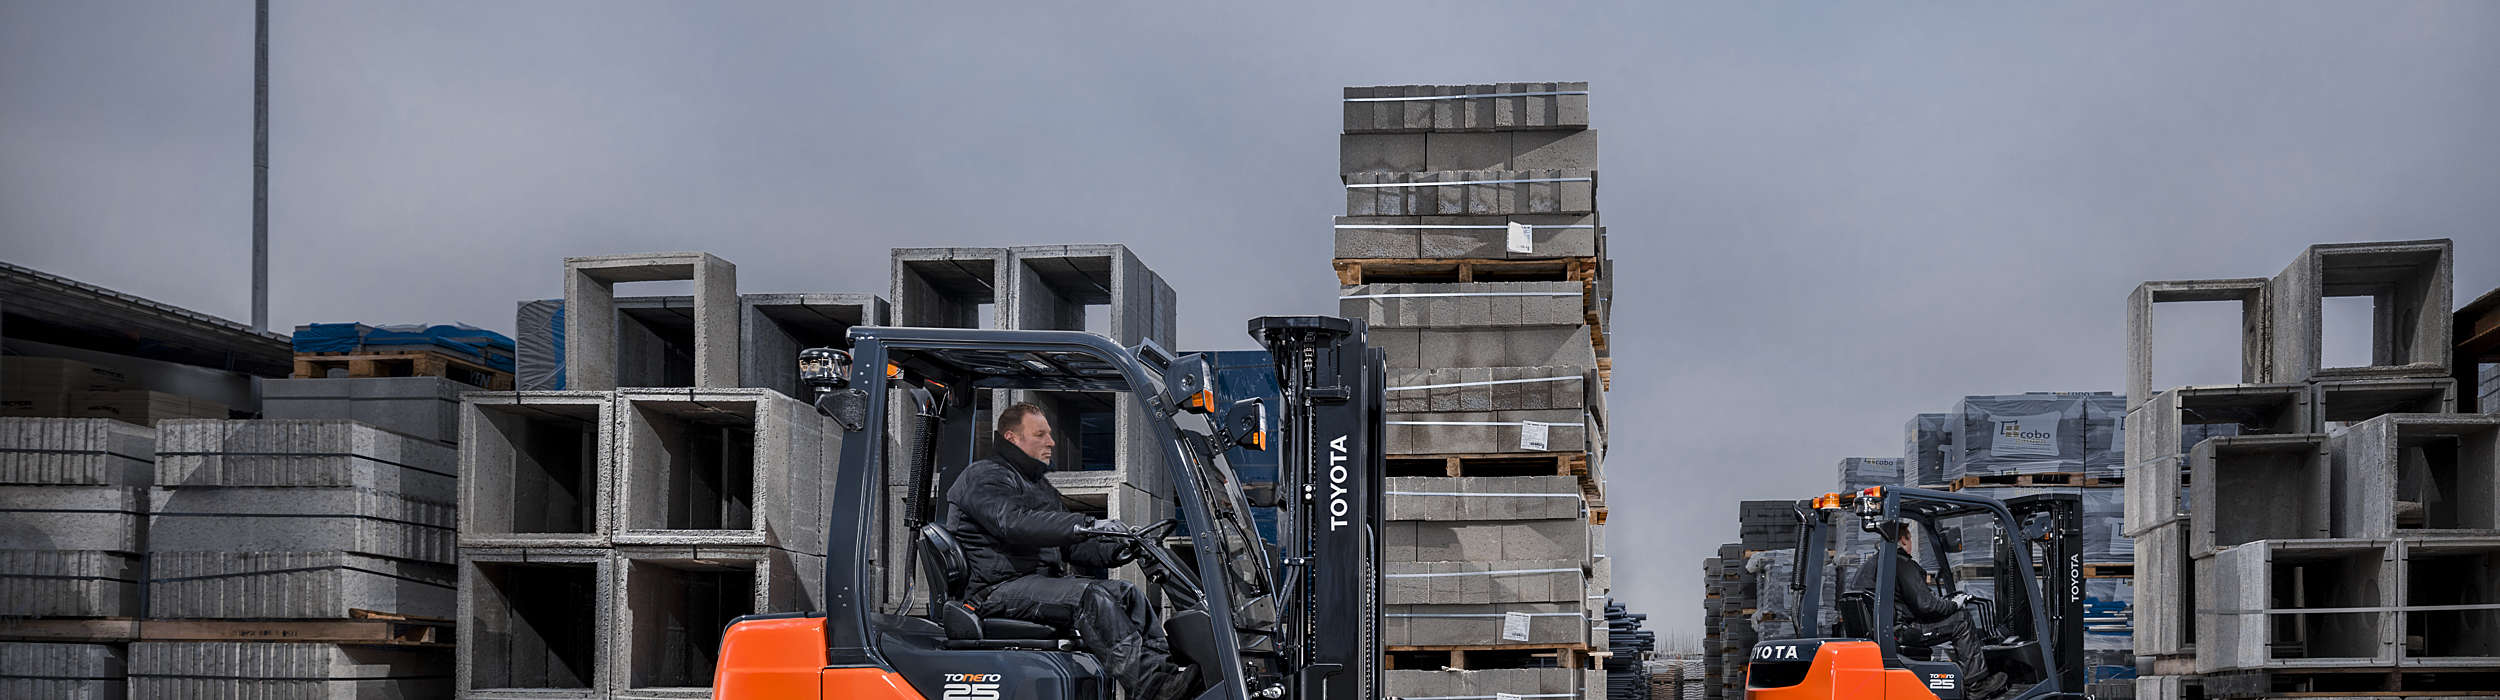 Toyota Tonero forklift truck used in construction industry